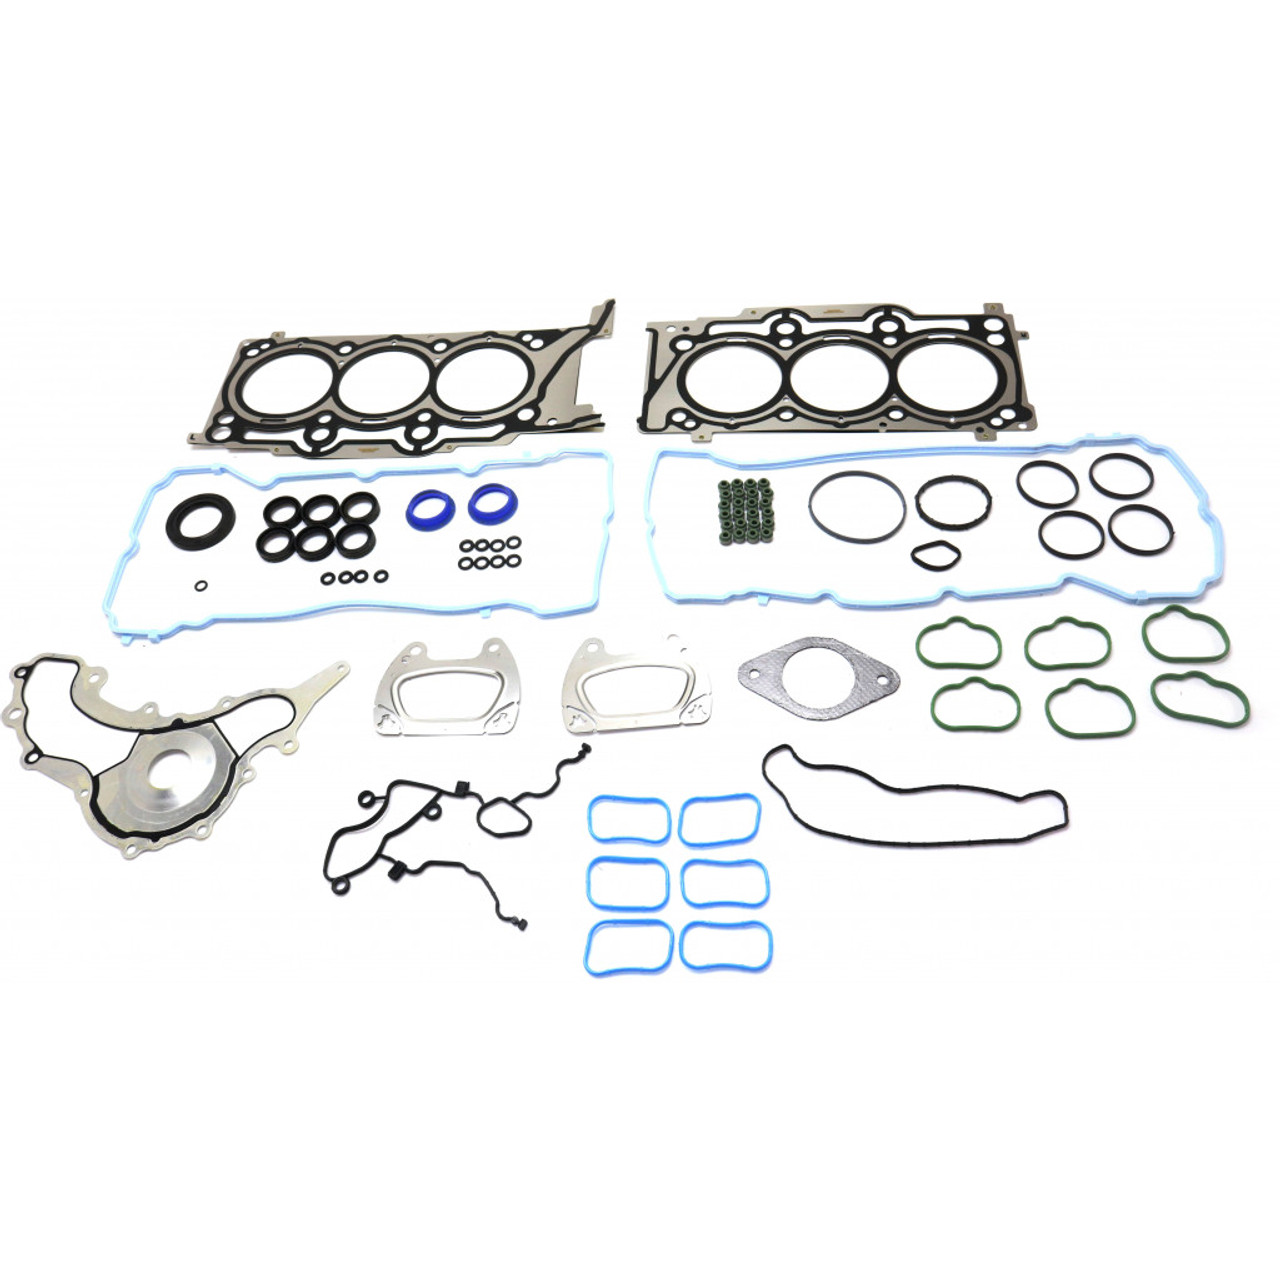 Head Gasket Set compatible with Challenger/Charger/Journey 11-16 6 Cyl 3.6L Eng. 